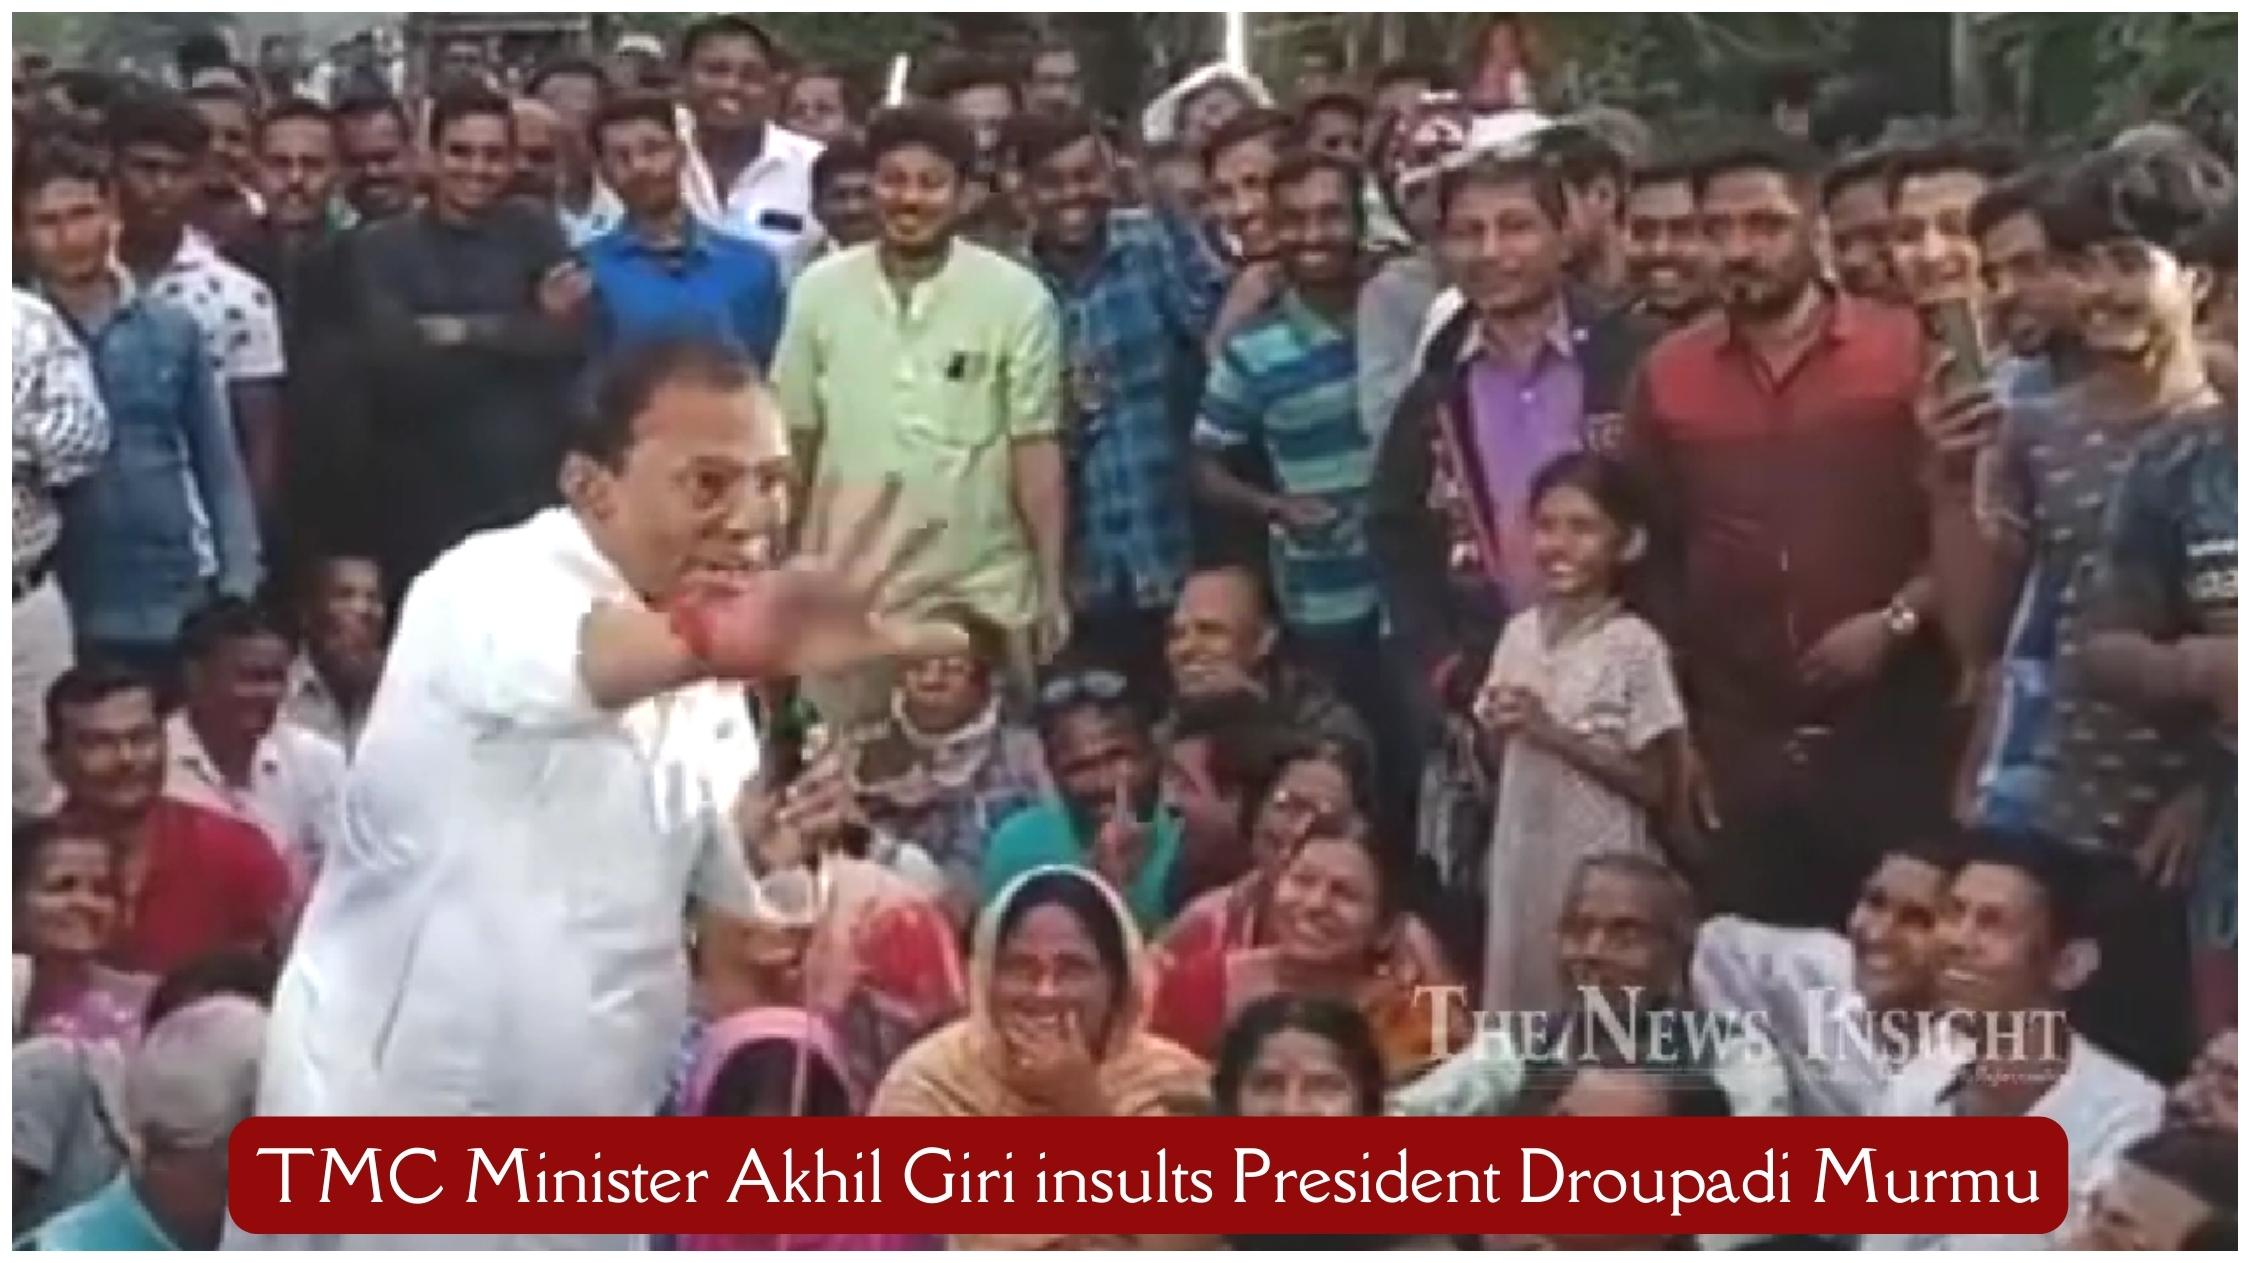 Trinamool Congress's Minister of Correctional Homes in the West Bengal administration, Akhil Giri, is under fire for his statements about President Droupadi Murmu's appearance.